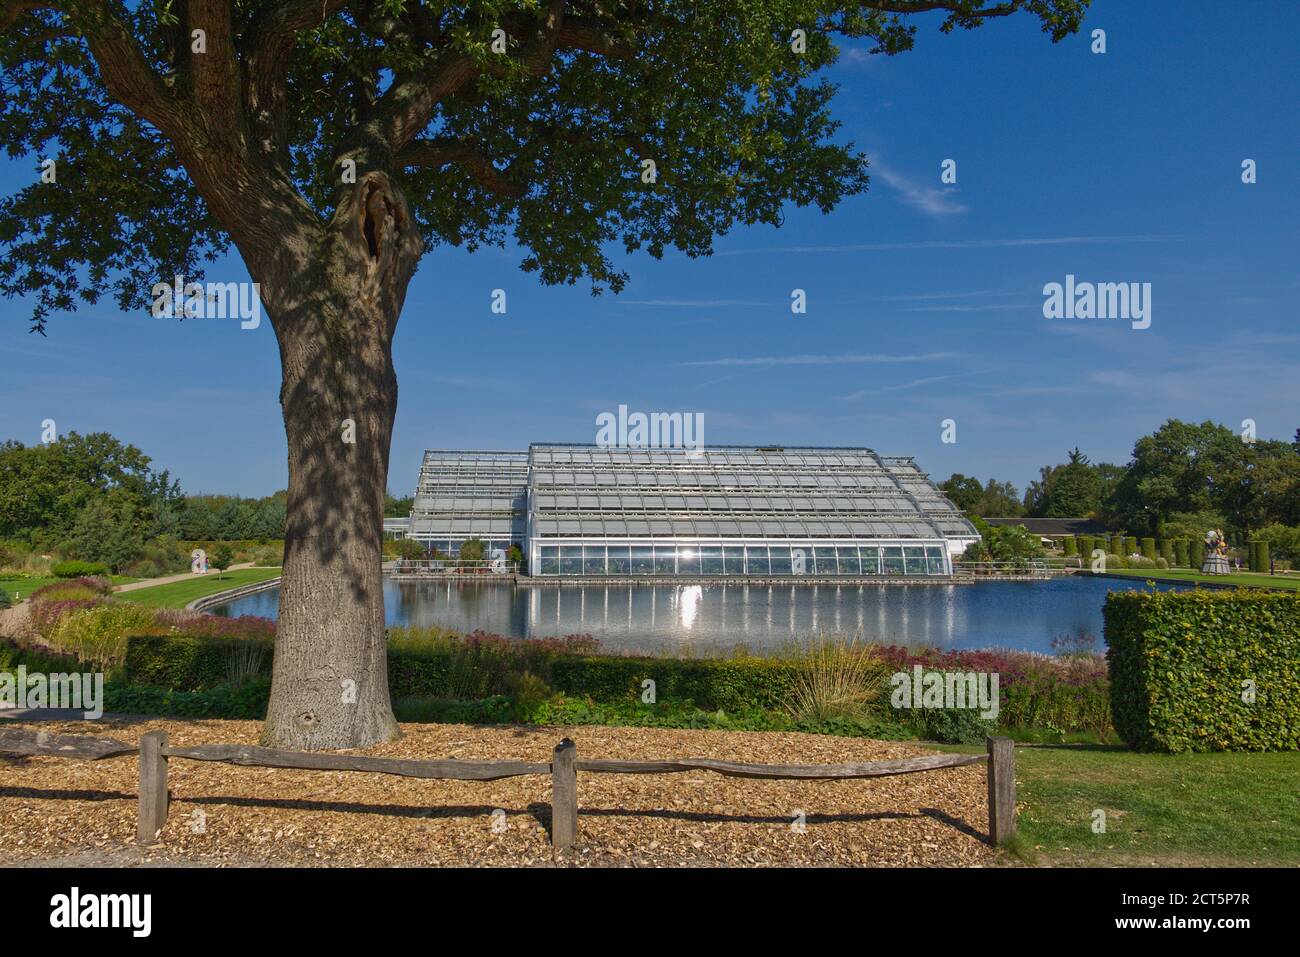 The Glasshouse reflected in the lake at RHS Garden, Wisley, Surrey, UK Stock Photo